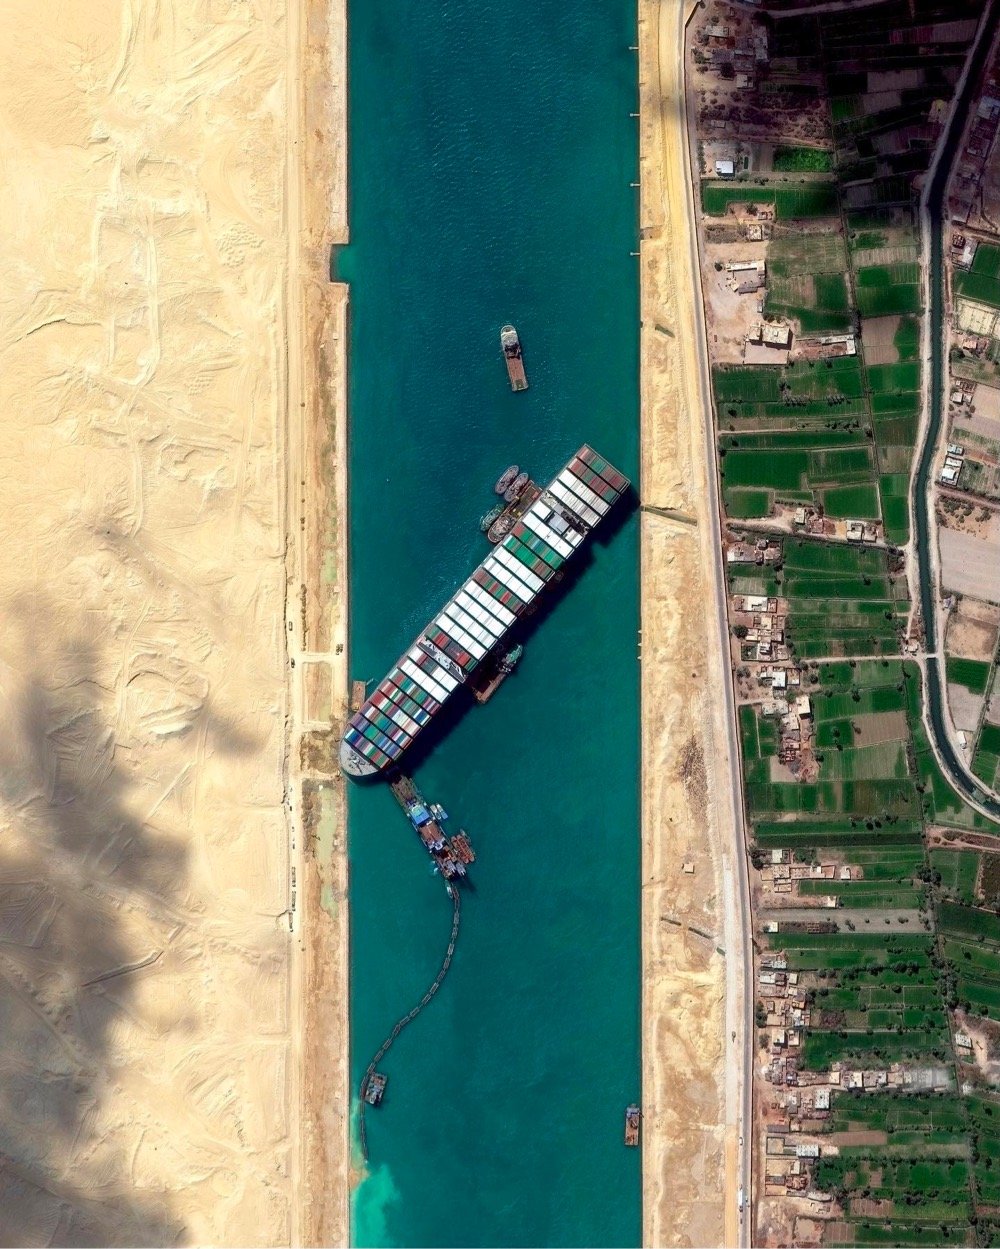 a ship called the Ever Given is stuck in the Suez Canal